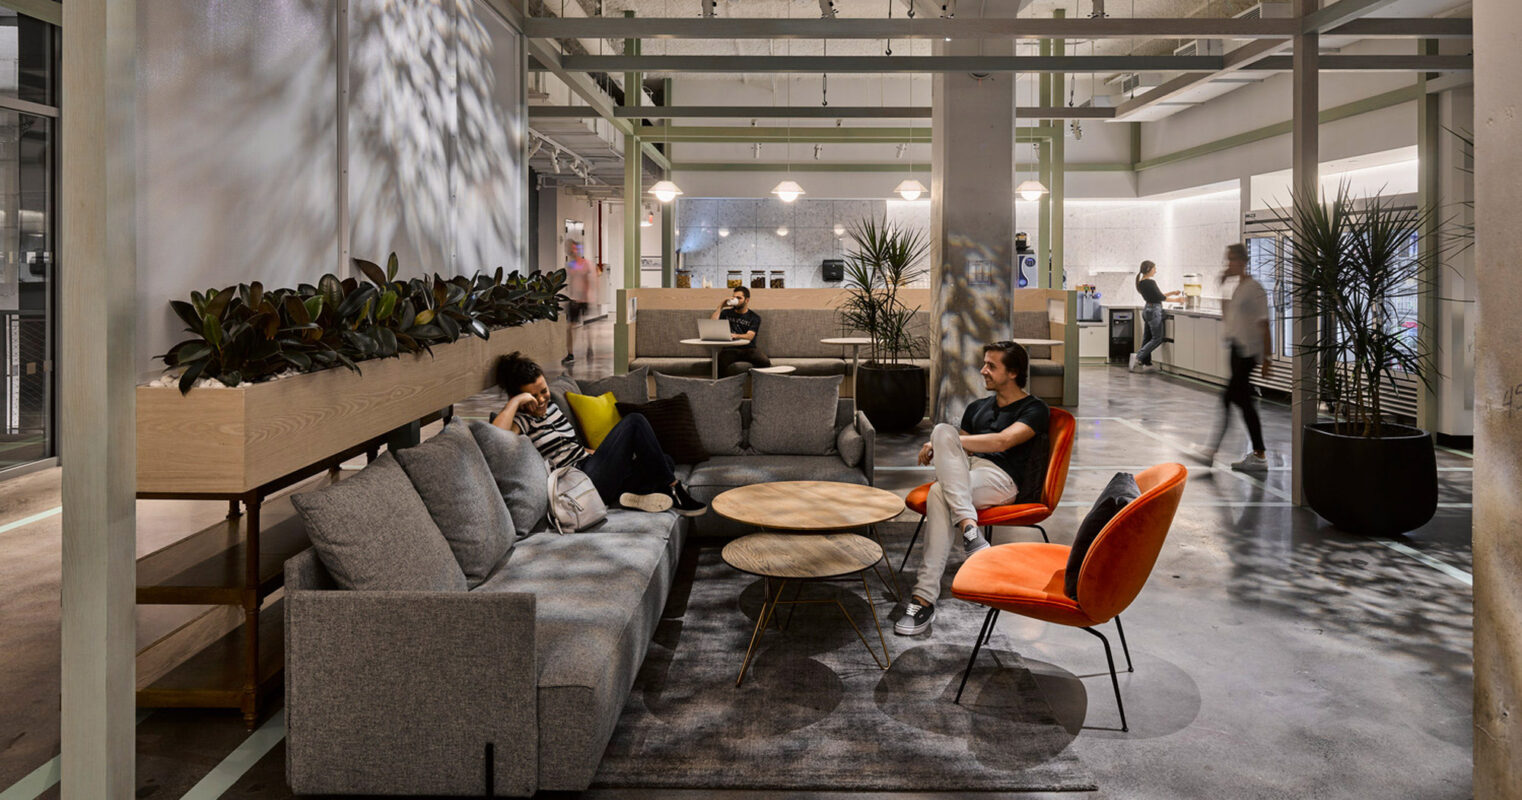 Contemporary open-plan office lounge with modular gray seating, round wooden tables, vibrant orange chairs, and wall-mounted planters. The space is enhanced by patterned natural light casting shadows, invoking a relaxed, collaborative atmosphere.